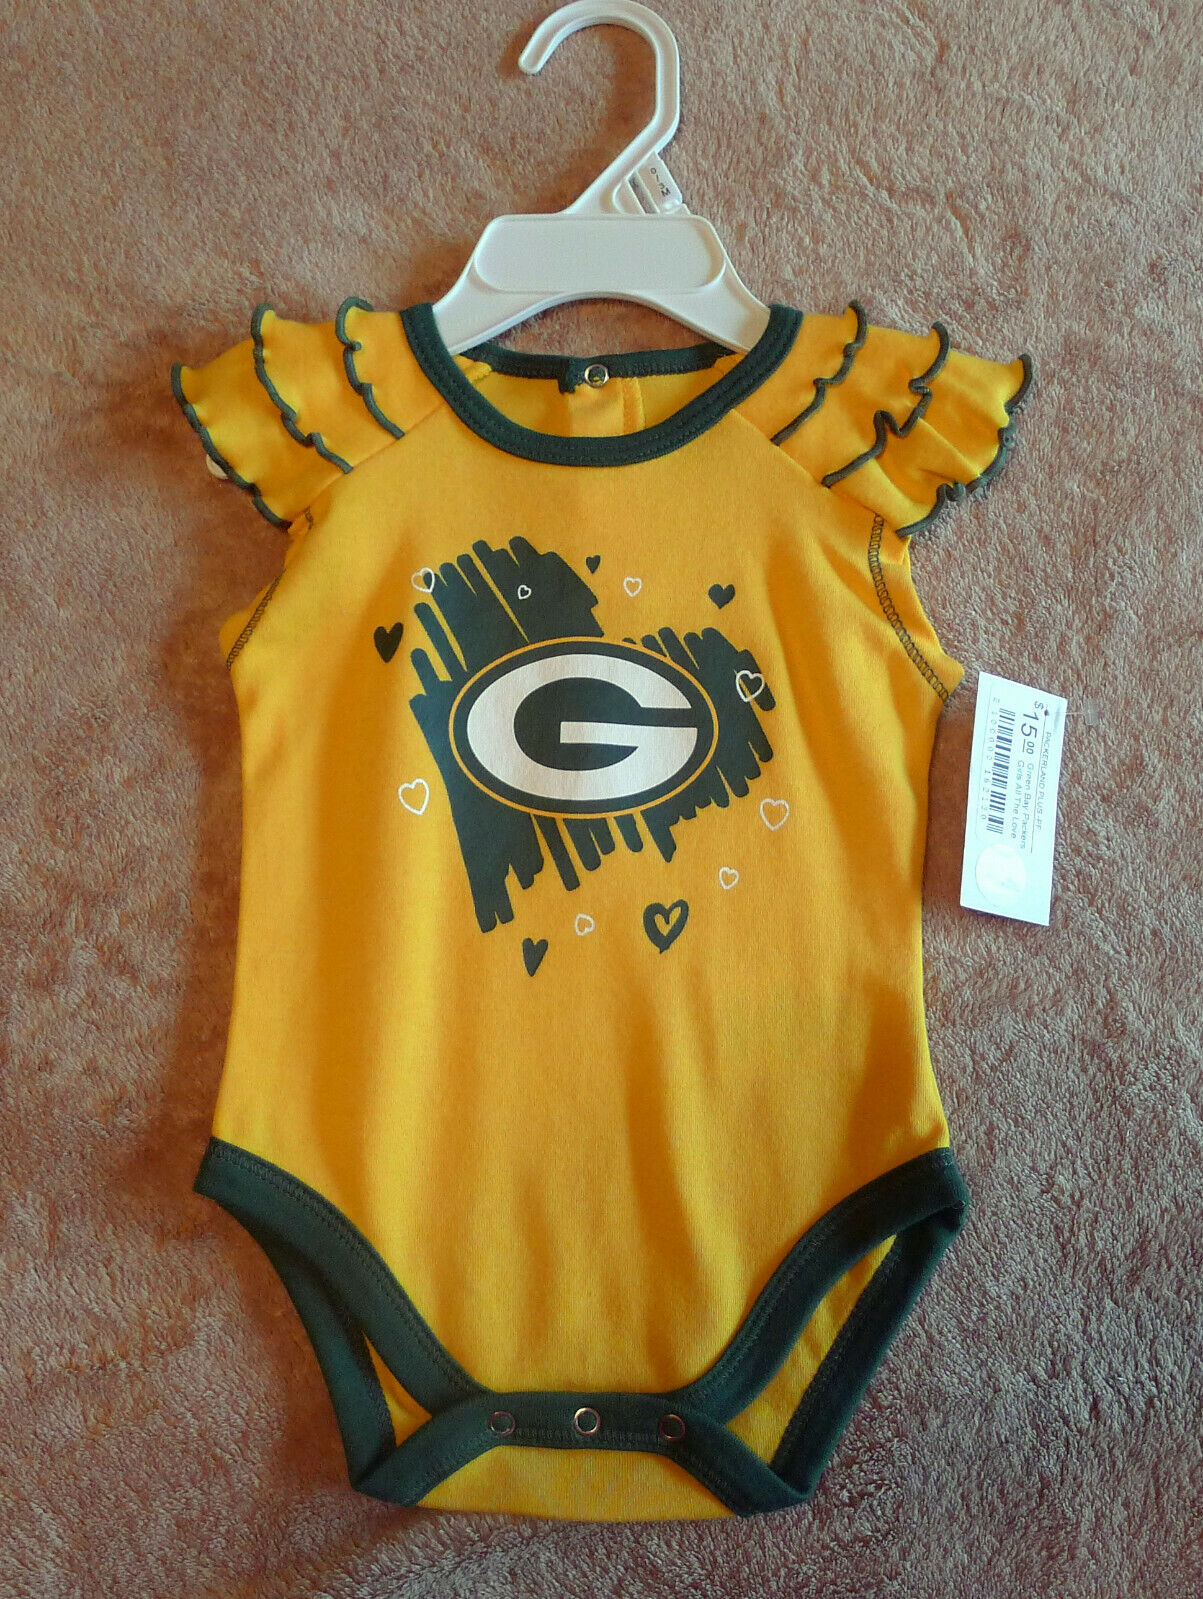 NWT Green Bay Packer Washington Mall Adorable Girls List price One Piece - “All the – Love”